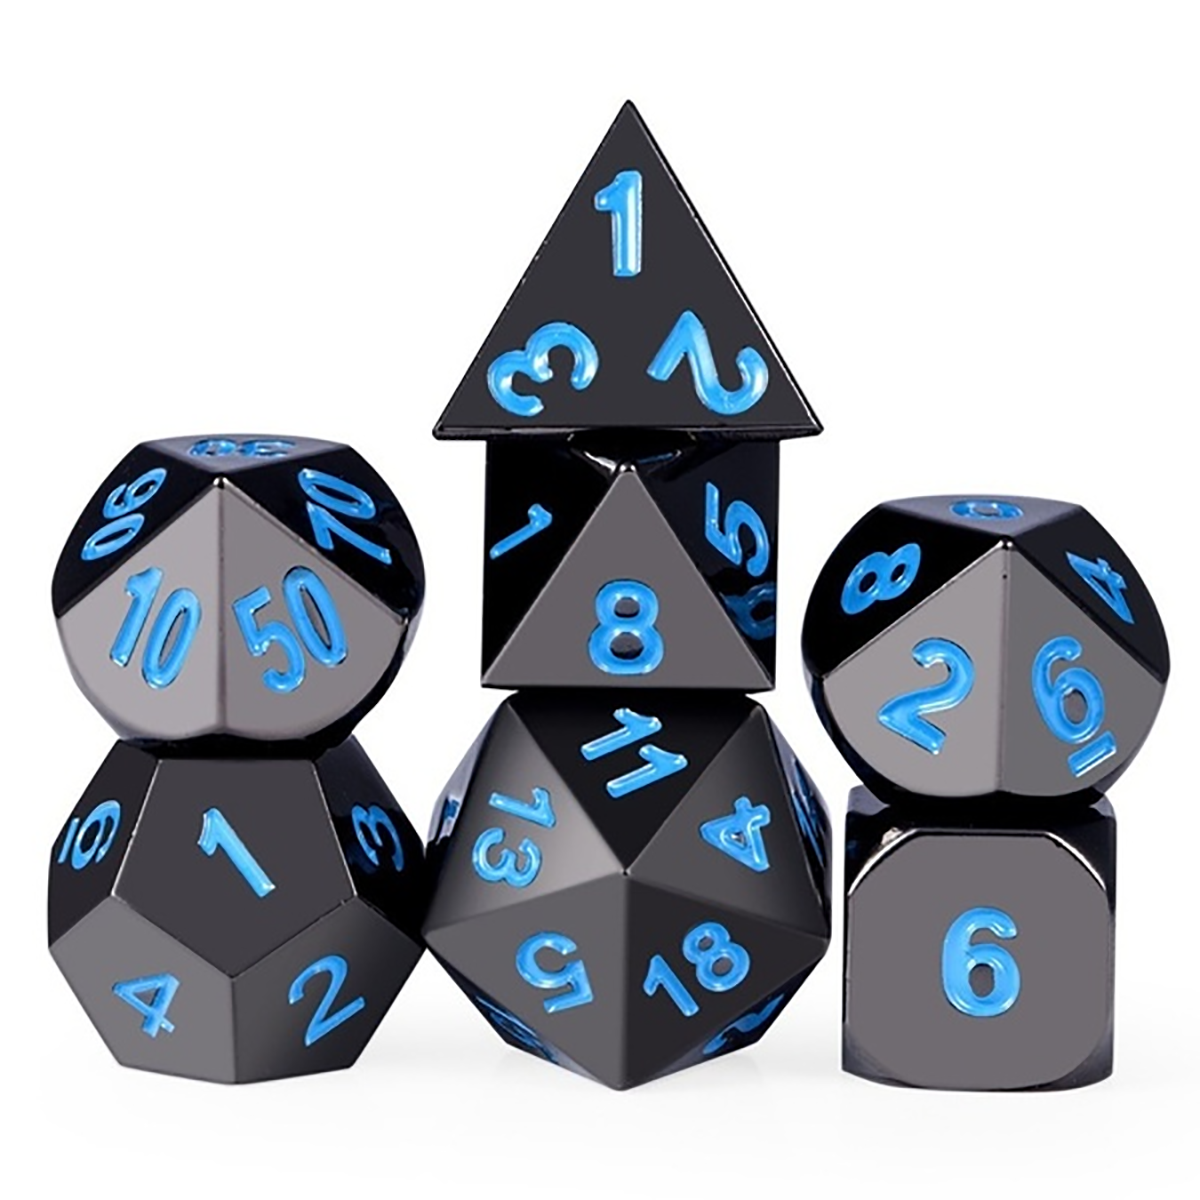 7-PcsSet-Metal-Dice-Set-Role-Playing-Dragons-Table-Game-With-Cloth-Bag-Bar-Party-Game-Dice-1677684